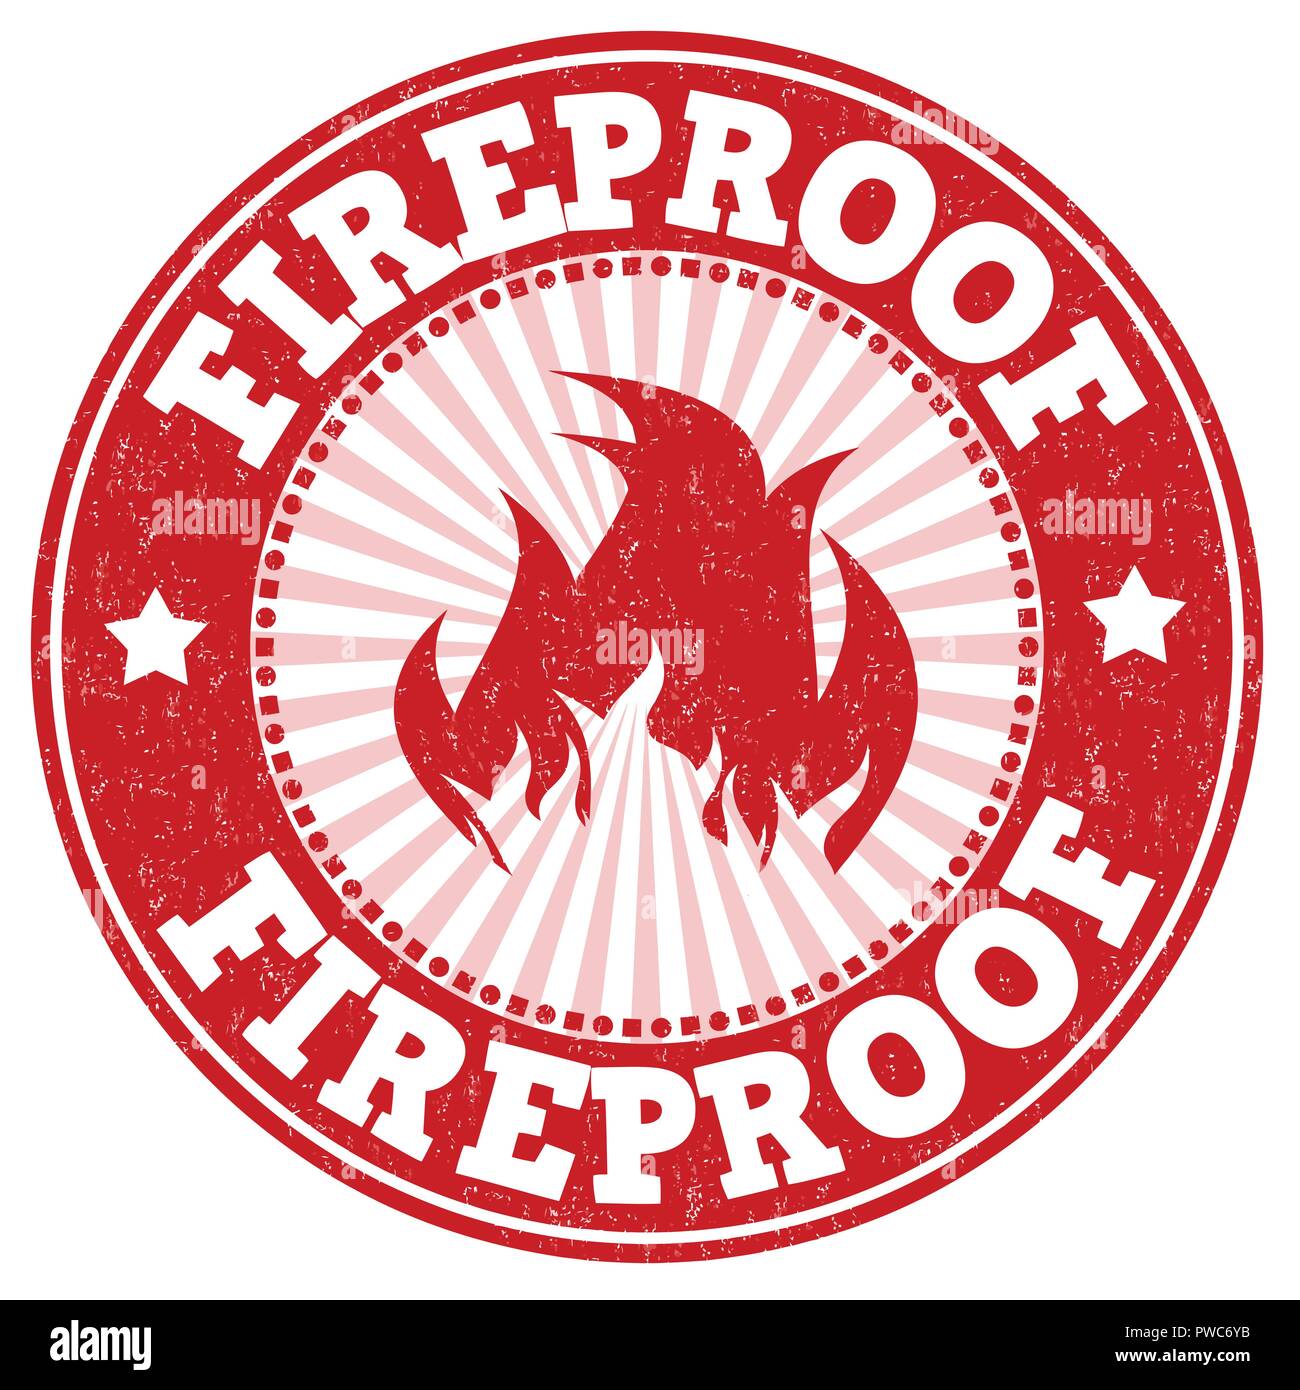 Fireproof sign or stamp on white background, vector illustration Stock Vector